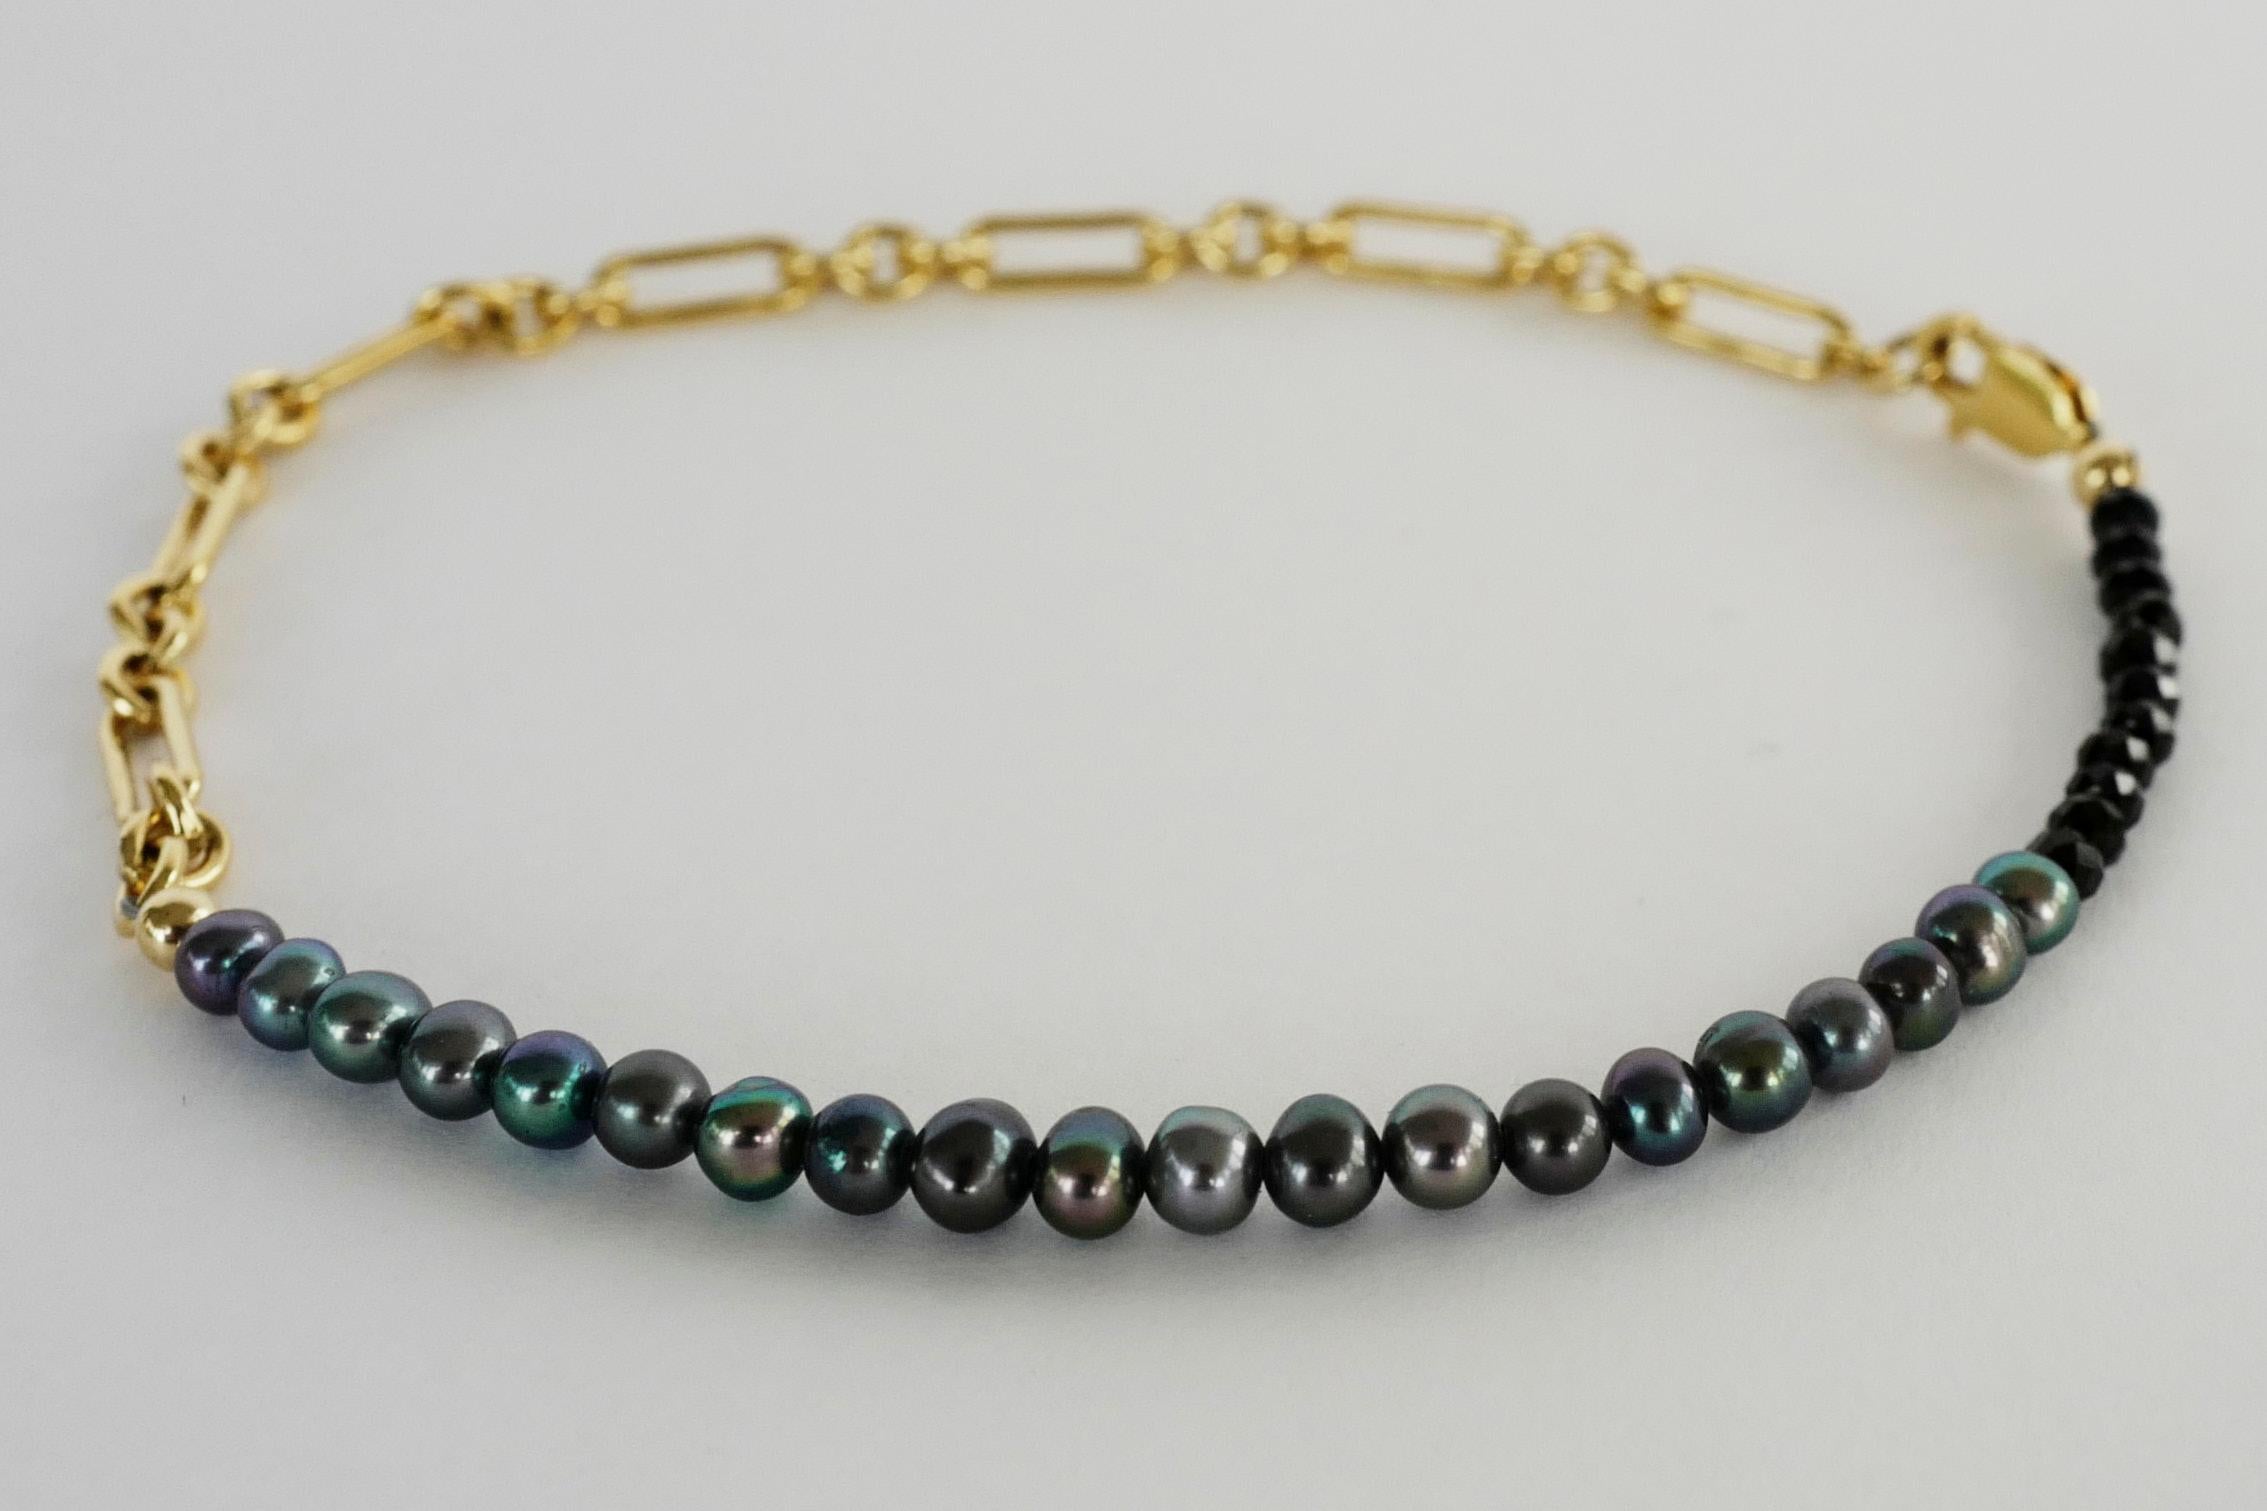 Women's Black Pearl Beaded Choker Necklace Black Spinel Gold Filled Chain J Dauphin For Sale